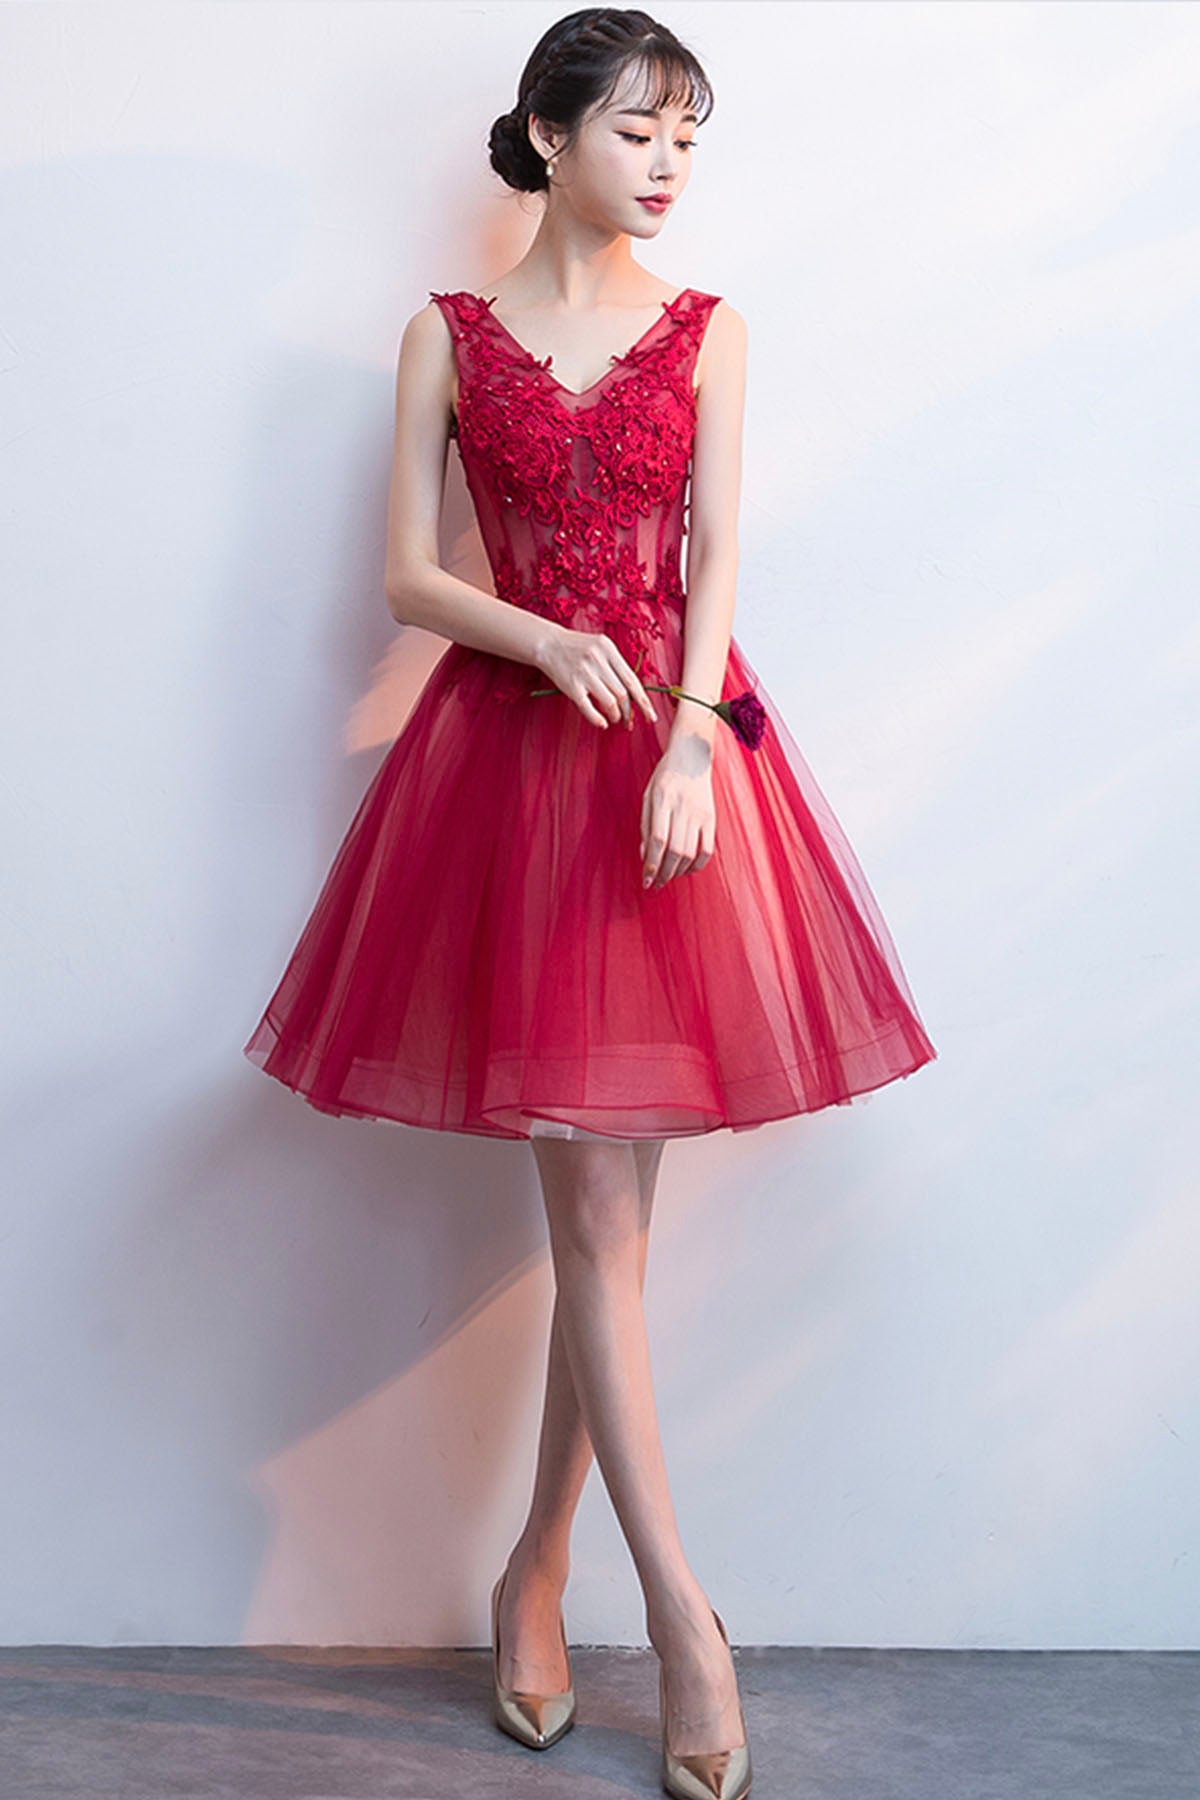 Red V-Neck Lace Short Prom Dress, Cute A-Line Homecoming Party Dress